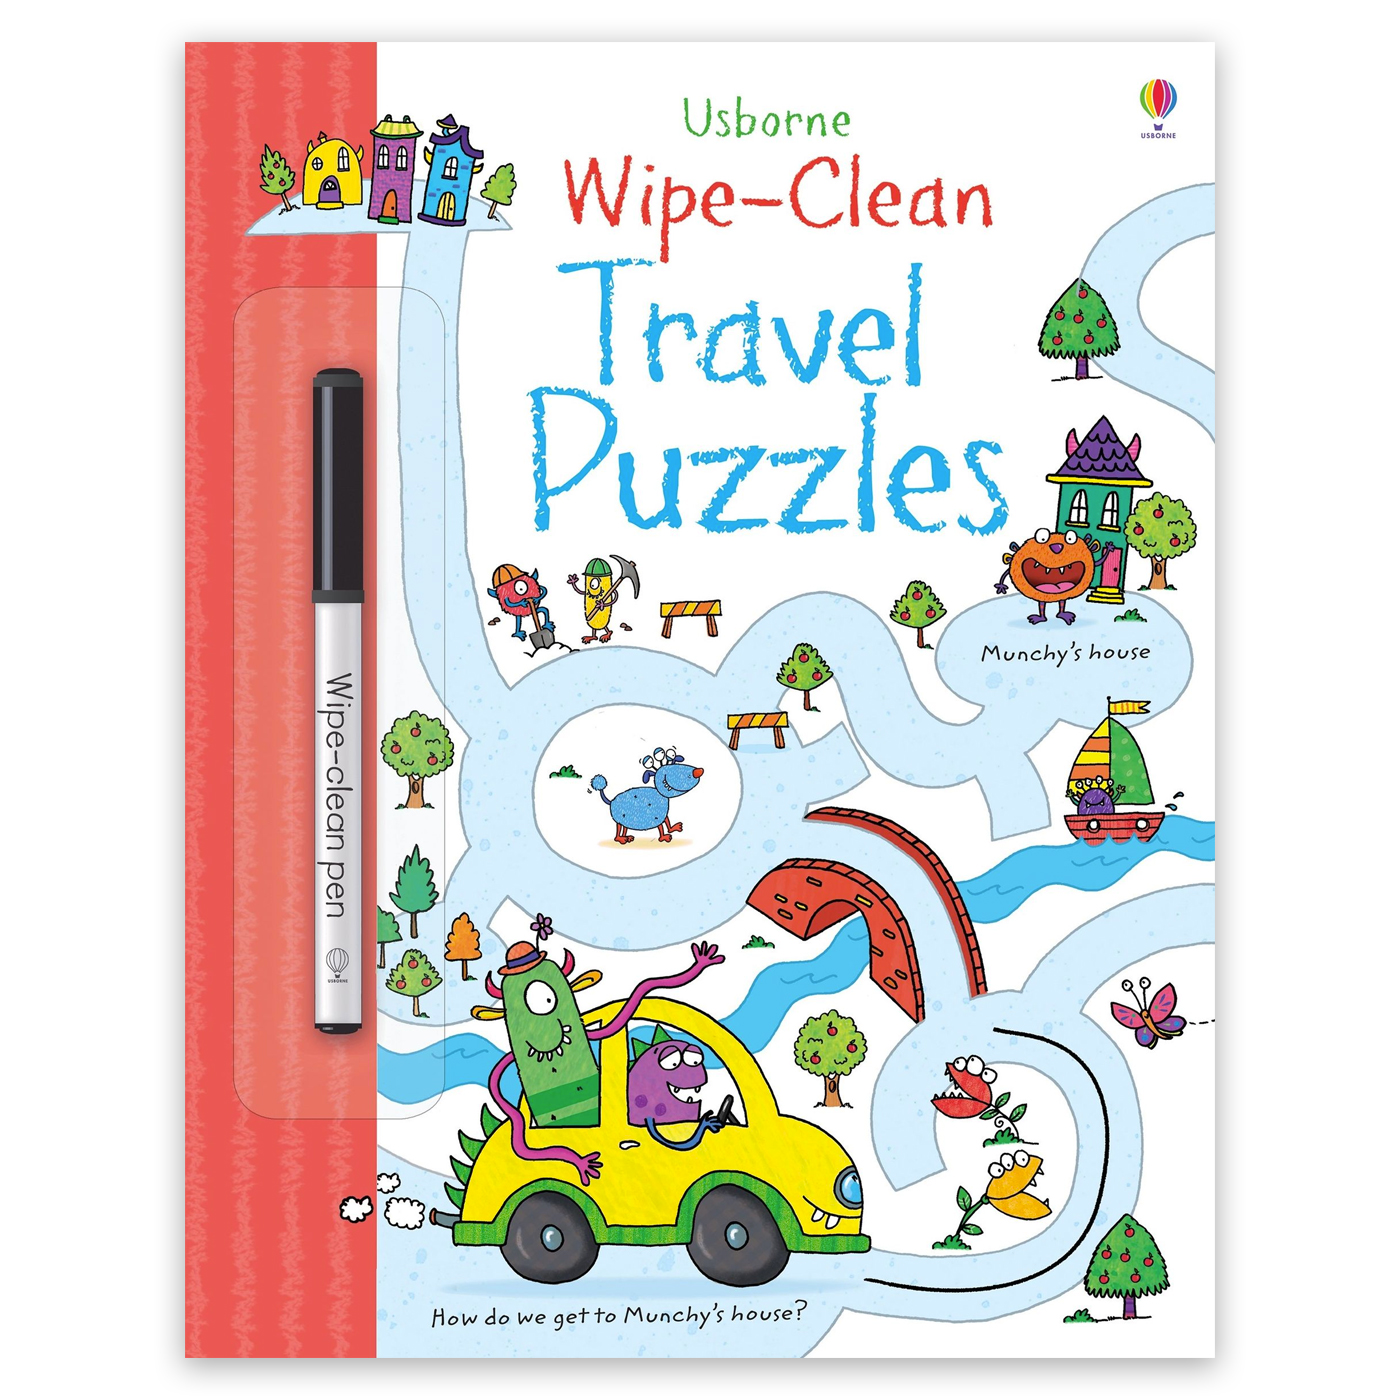  Wipe-Clean Travel Puzzles